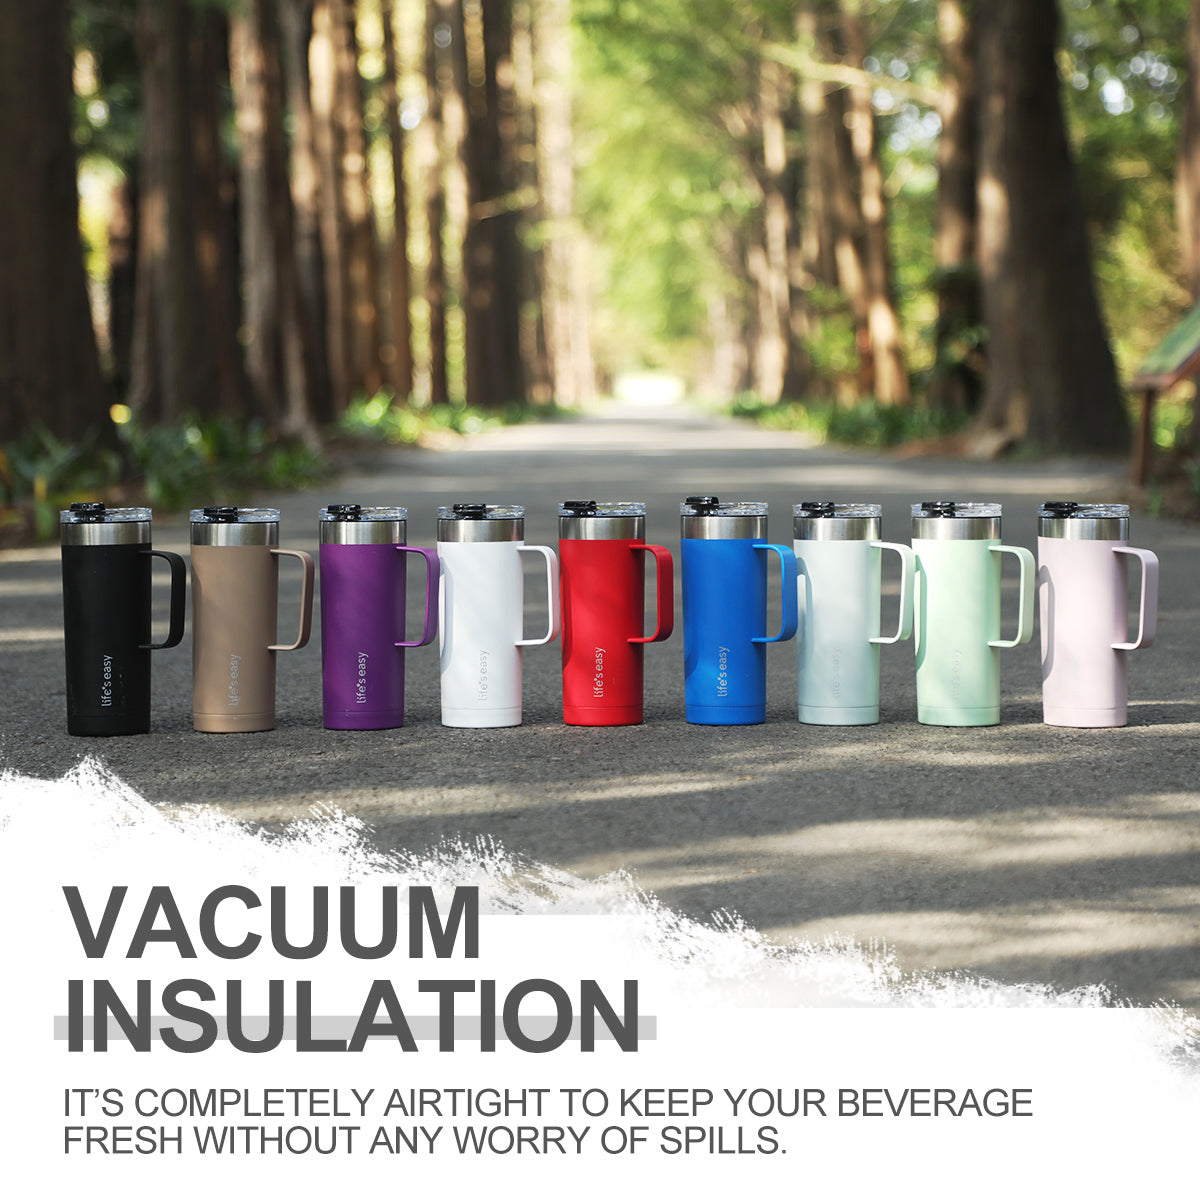 Life's Easy Stainless Steel Double Wall Insulated Travel Mug with Carabiner  Handle - Indoor and Outd…See more Life's Easy Stainless Steel Double Wall